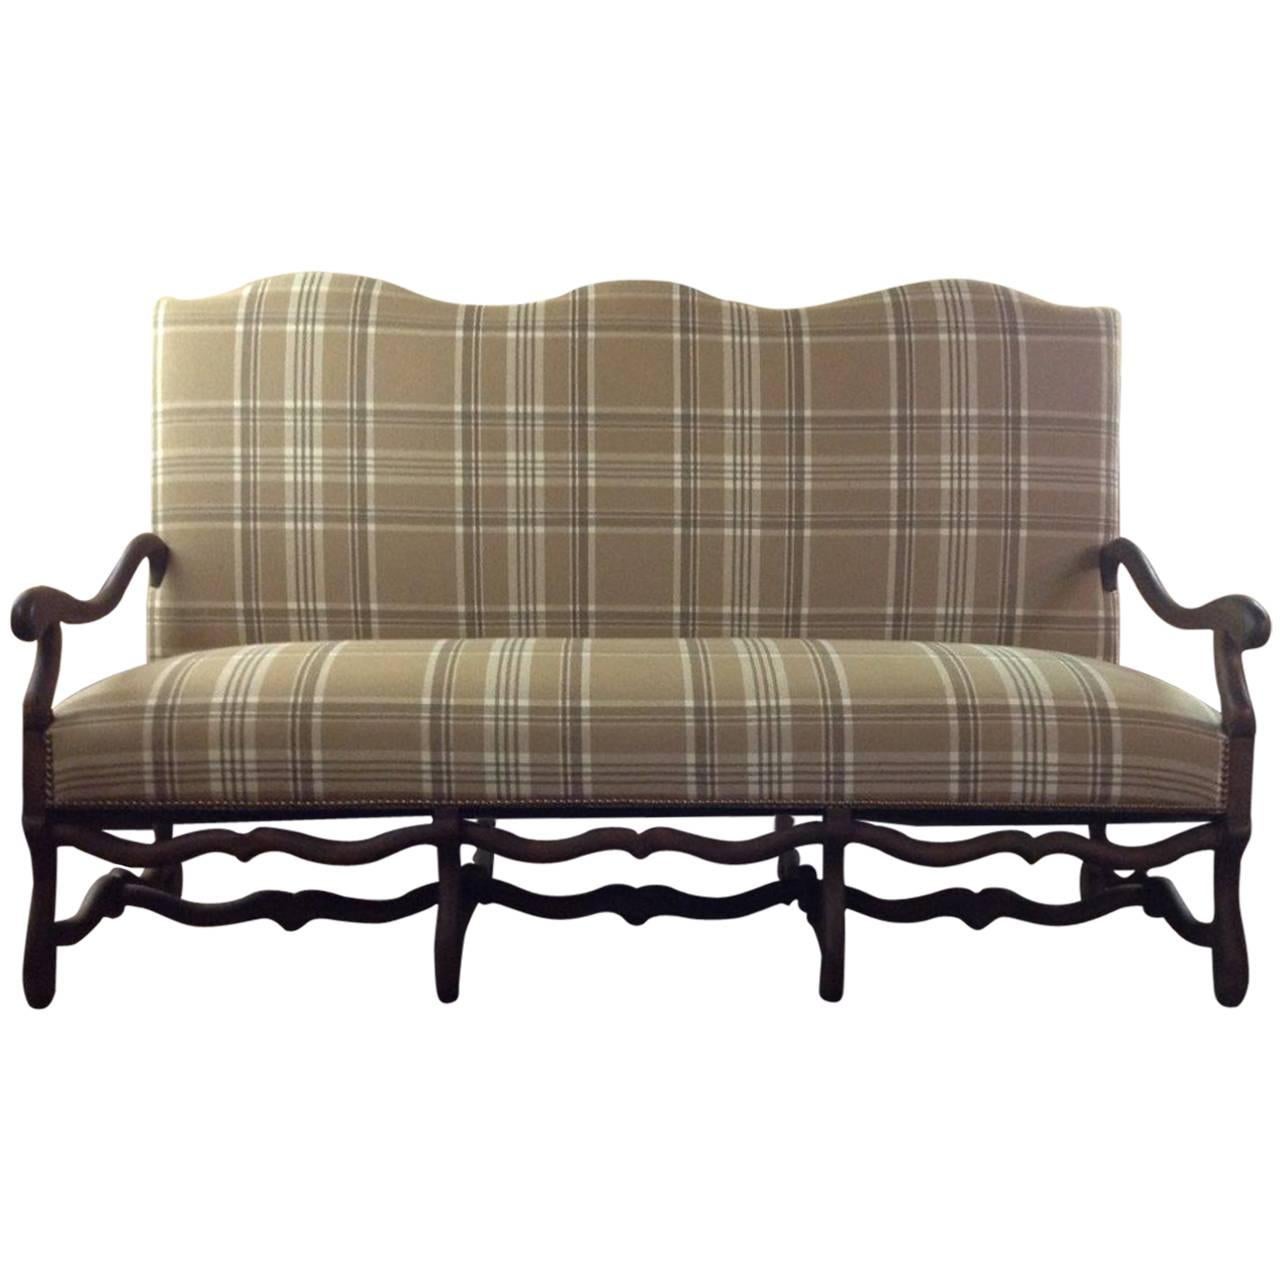 Vintage French Louis XIII Style Loveseat Upholstered in Ralph Lauren Plaid